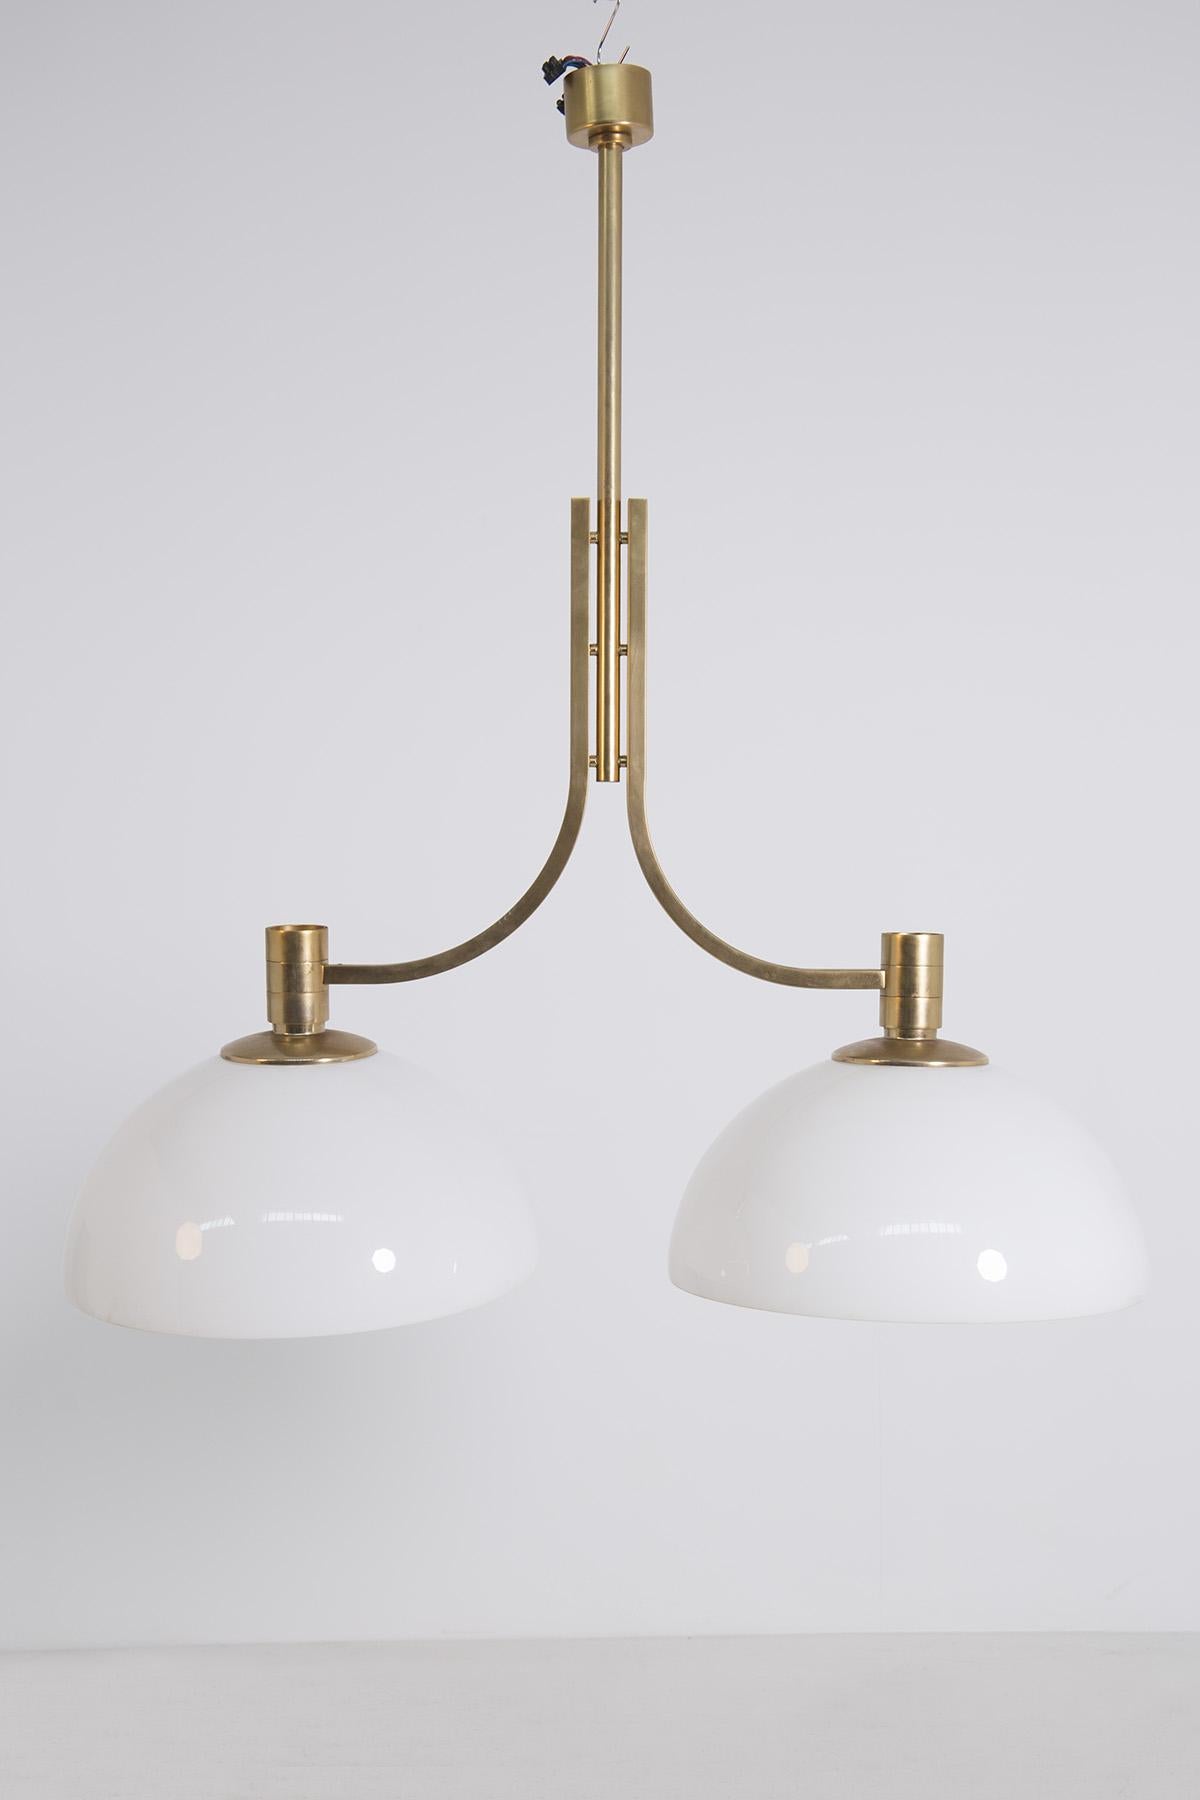 Large ceiling lamp by Sirrah Italia, designed by Franco Albini and Franca Helg 1970s. The large ceiling lamp is in perfect condition. Franco Albini's chandelier is a rare adjustable type, i.e. the two ceiling lights can be adjusted up or down as